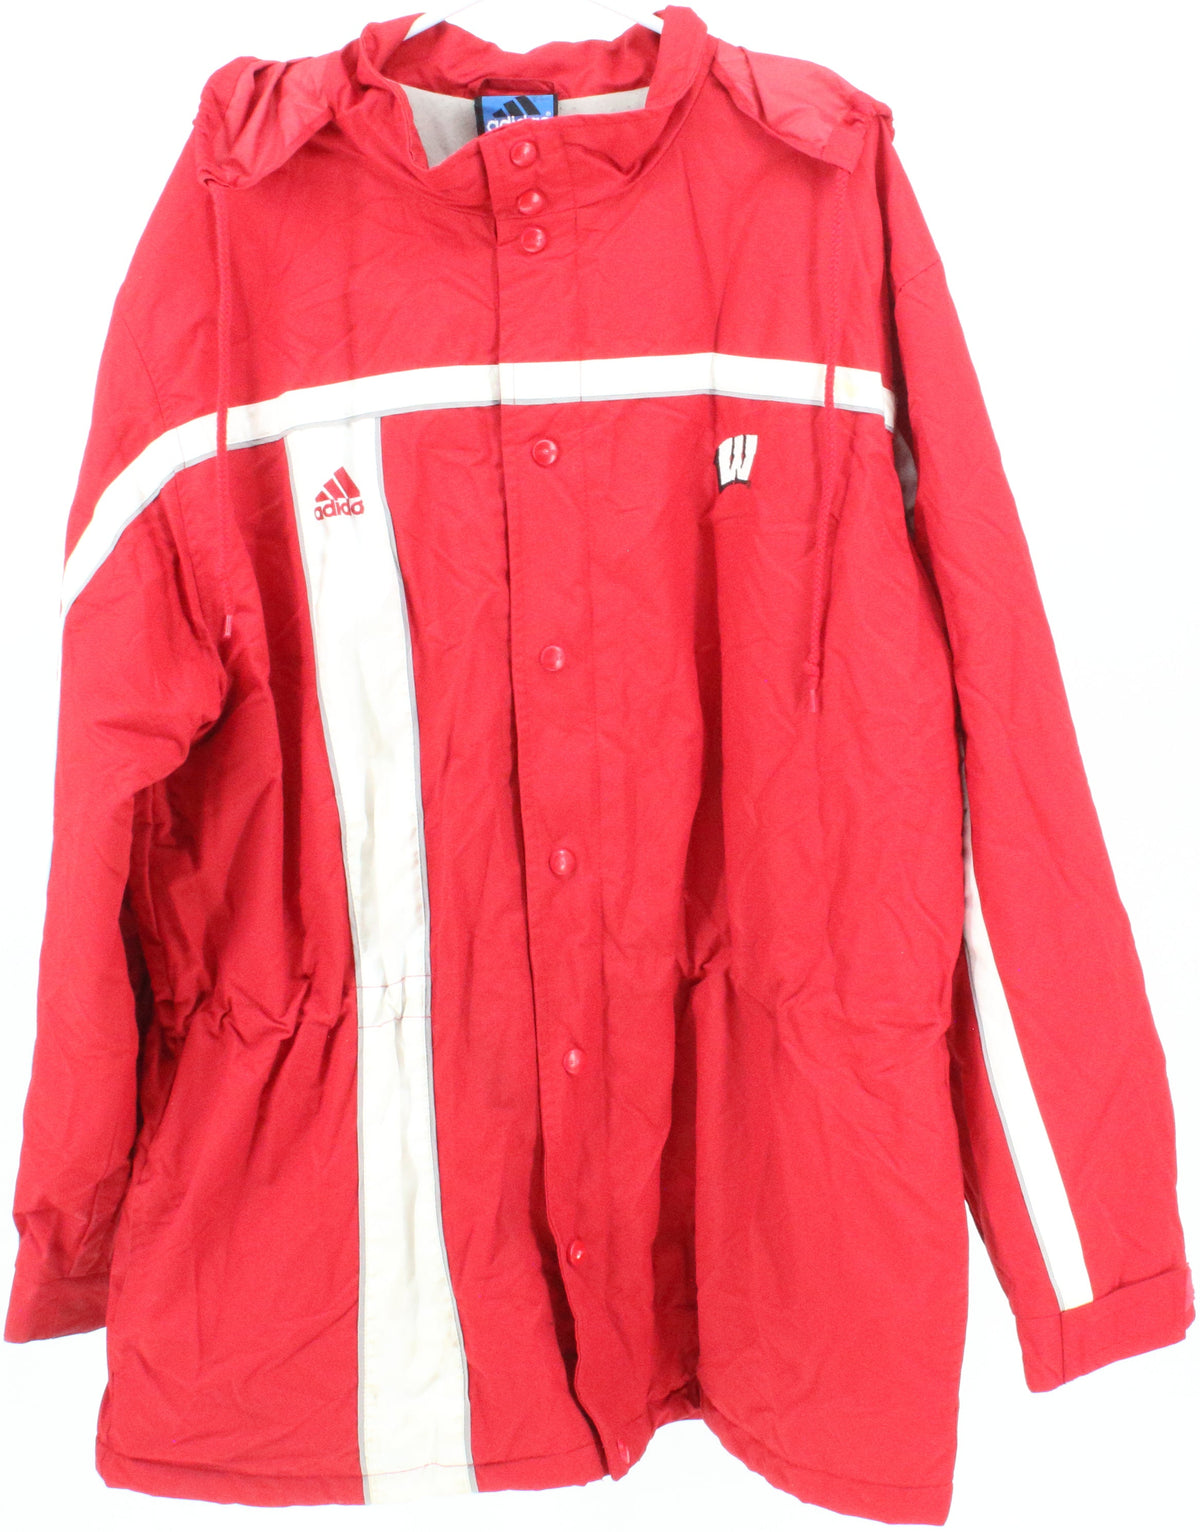 Adidas Wisconsin Red and White Parka